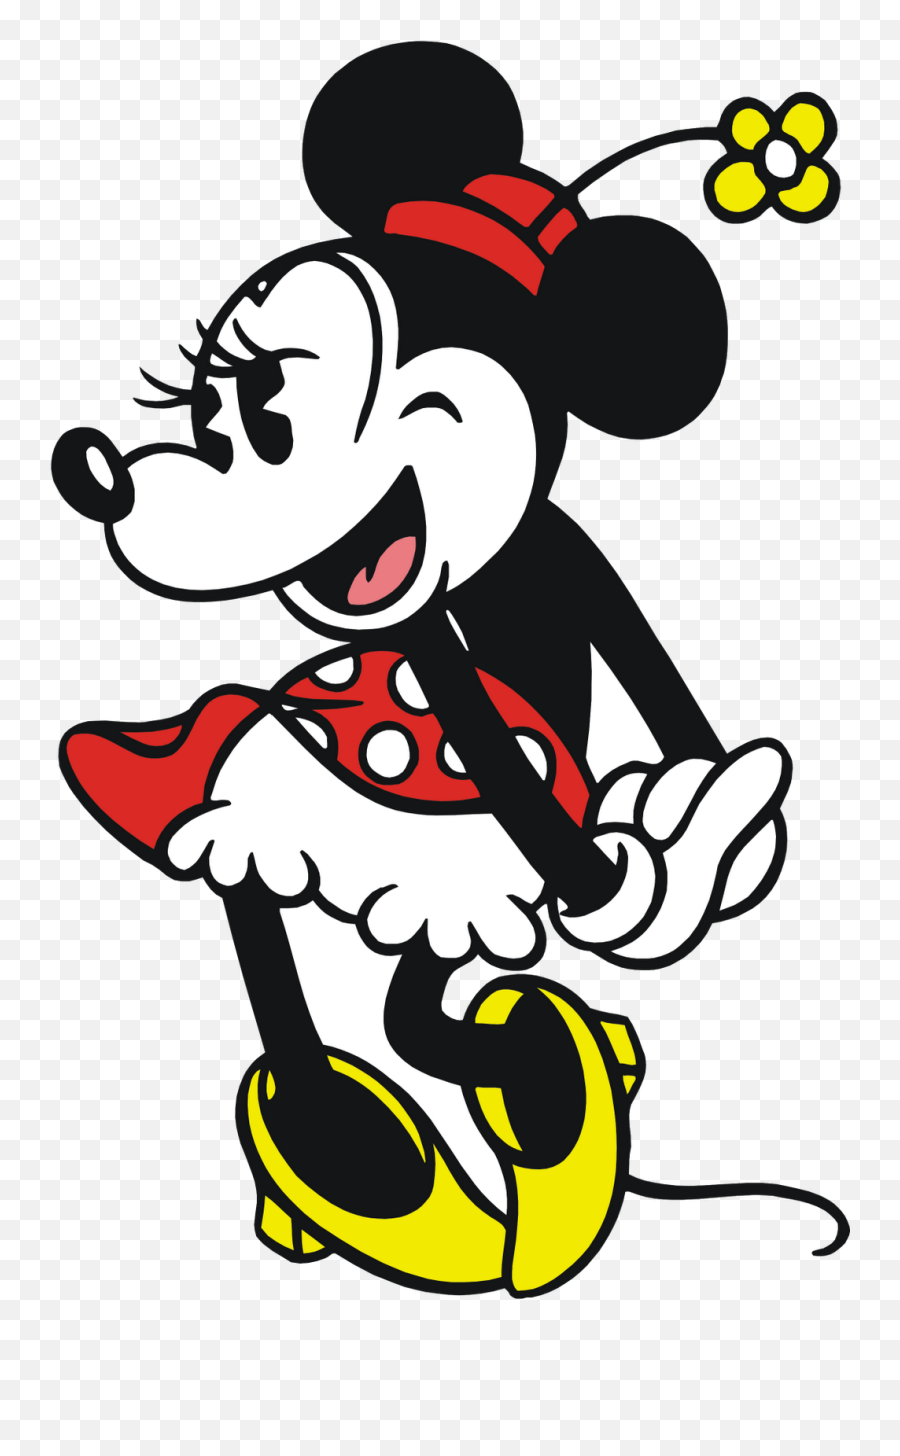 Image By Ethan Shaw - Minnie Mouse With Hat Emoji,Hat Tip Emoji